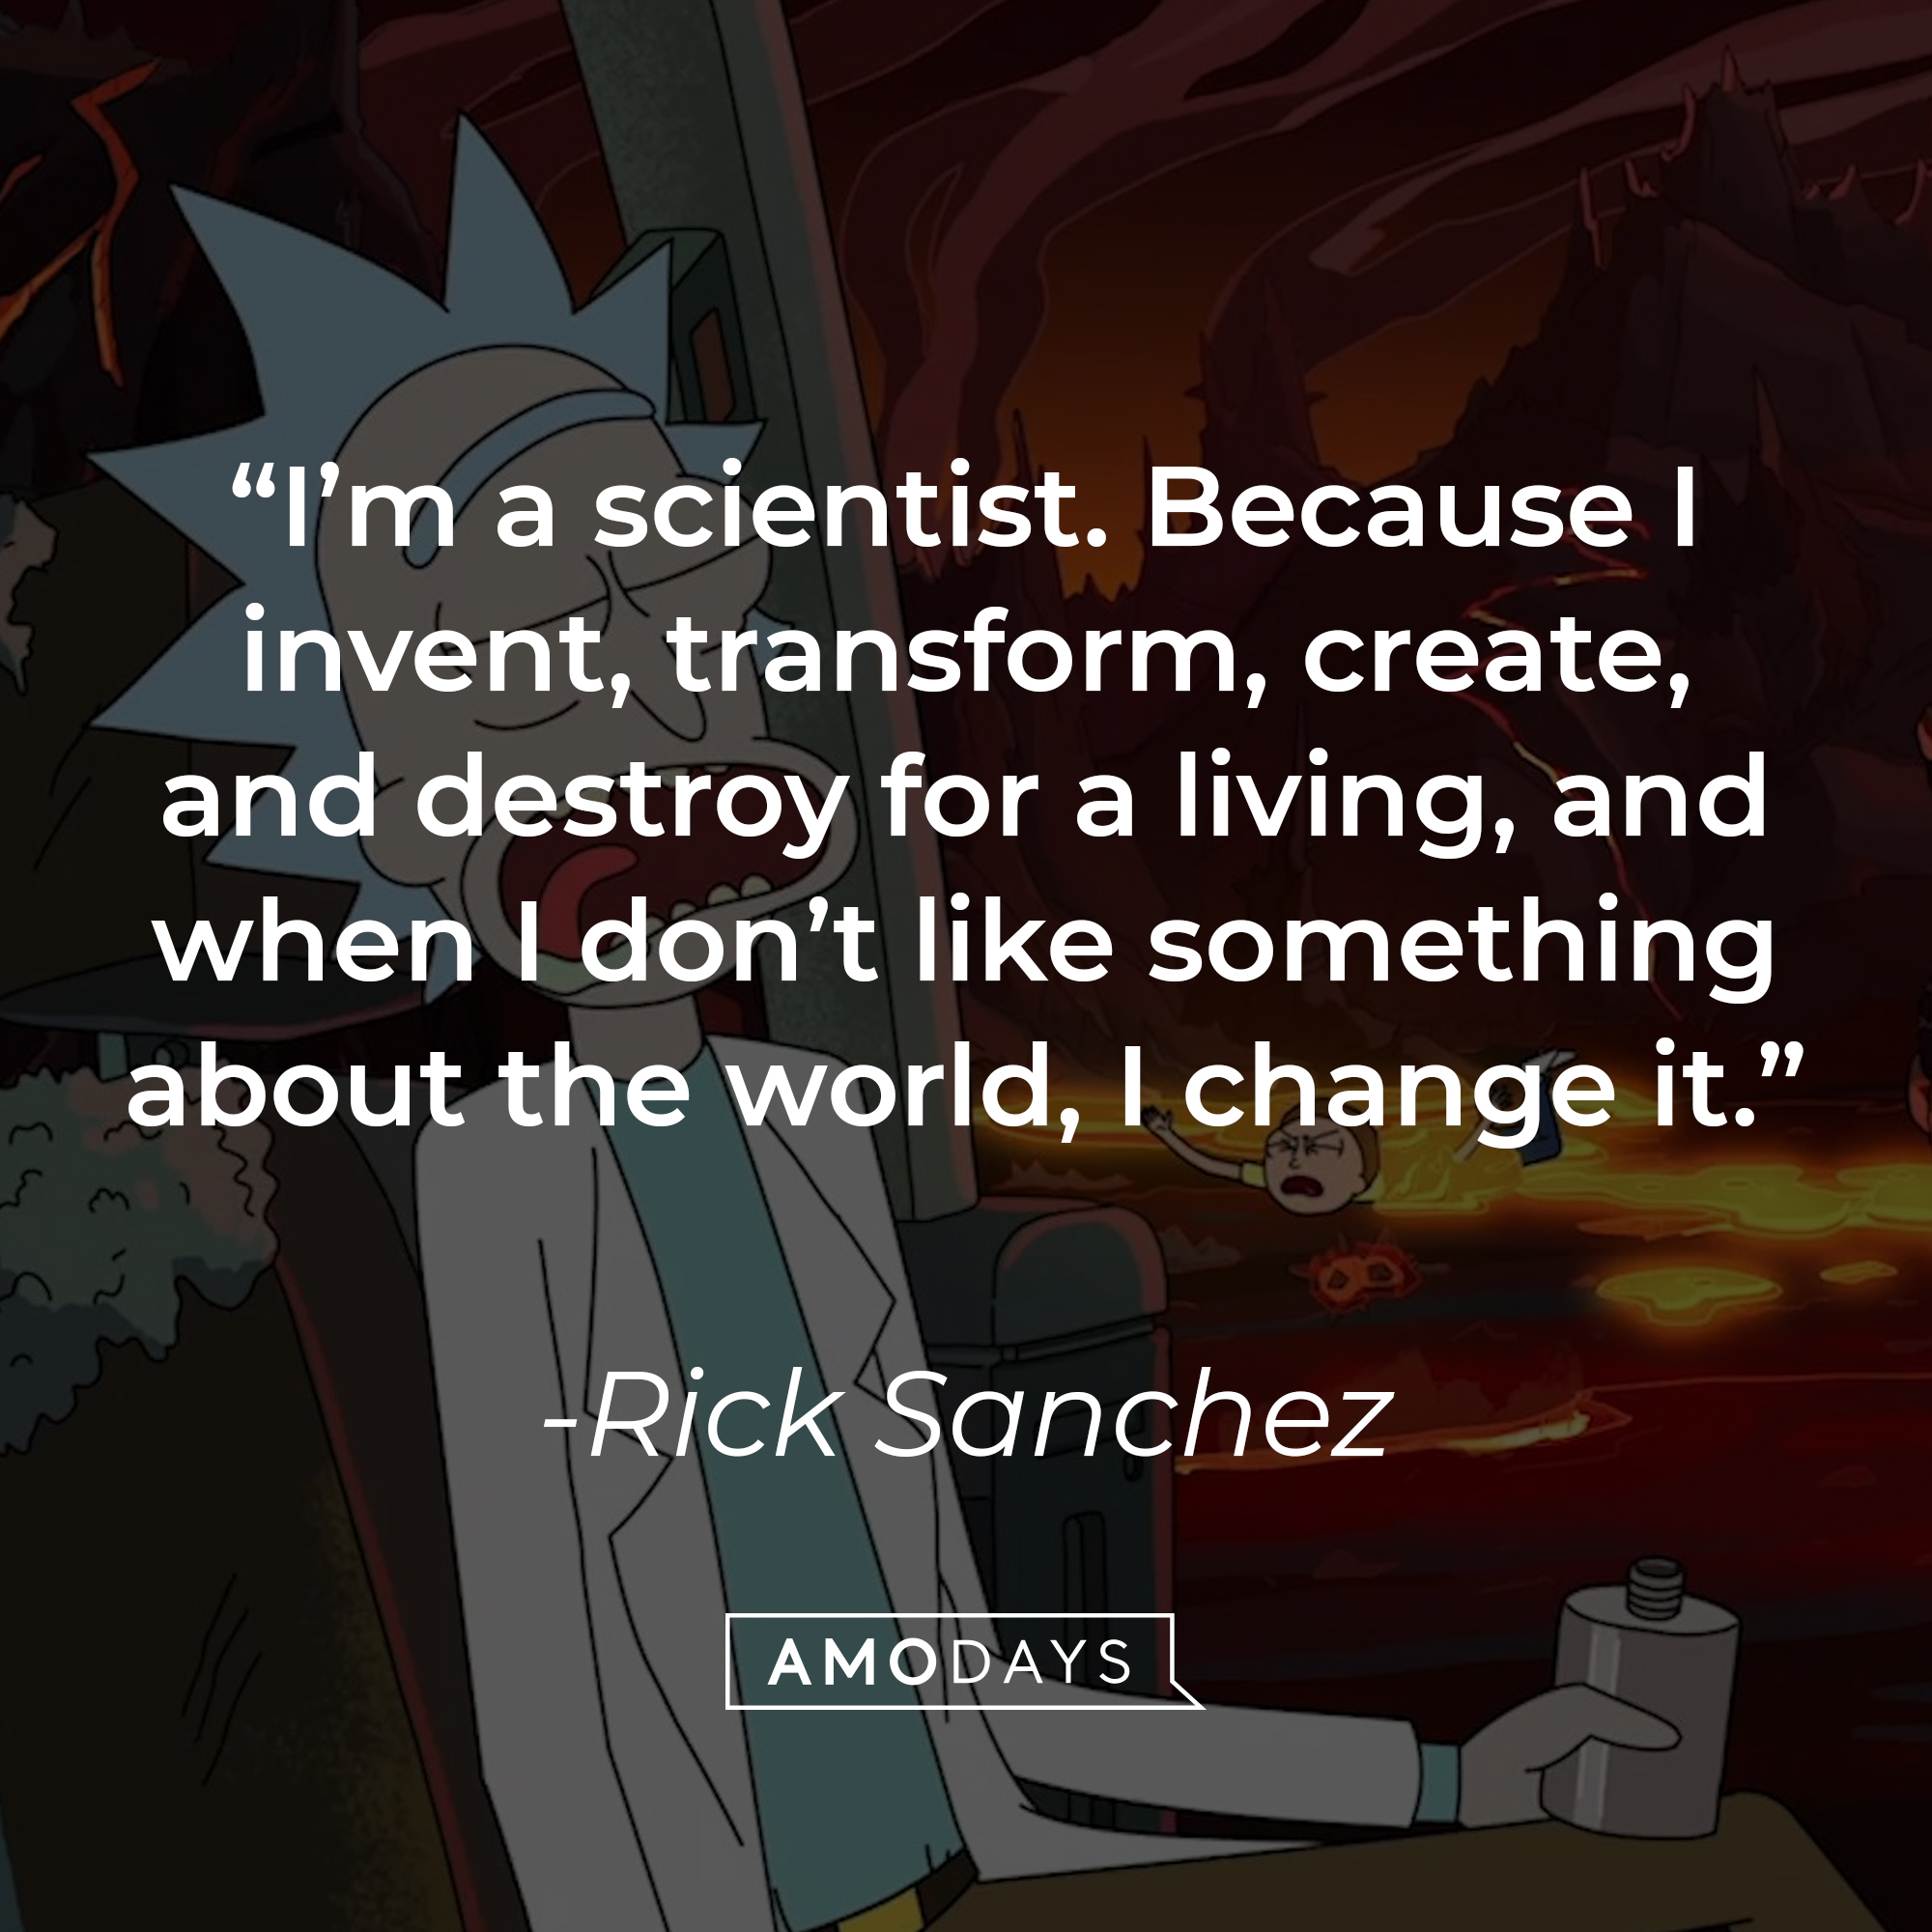 An image of Rick Sanchez with his quote: “I’m a scientist. Because I invent, transform, create, and destroy for a living, and when I don’t like something about the world, I change it.” | Source: Facebook.com/RickandMorty